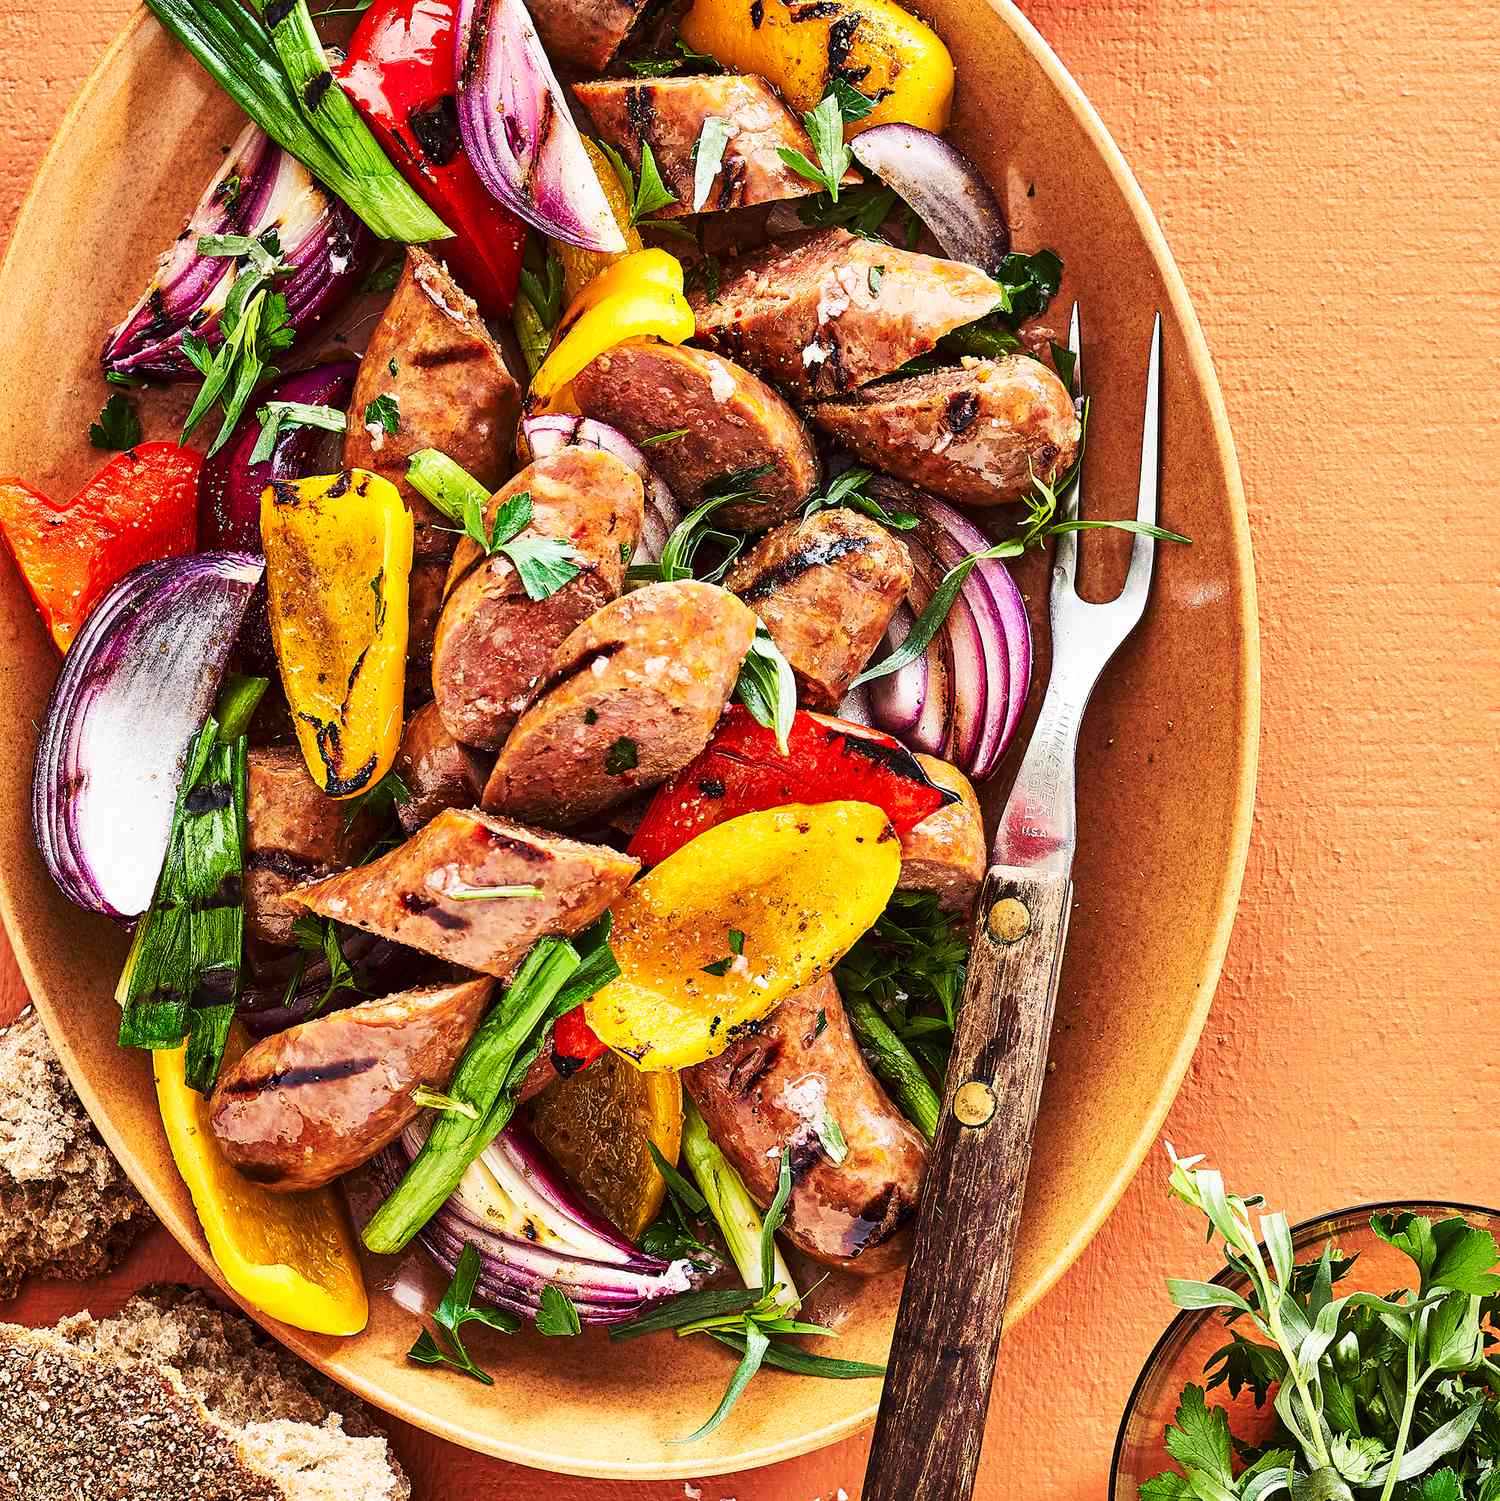 Grilled Sausage, Peppers & Onions with Herb Vinaigrette